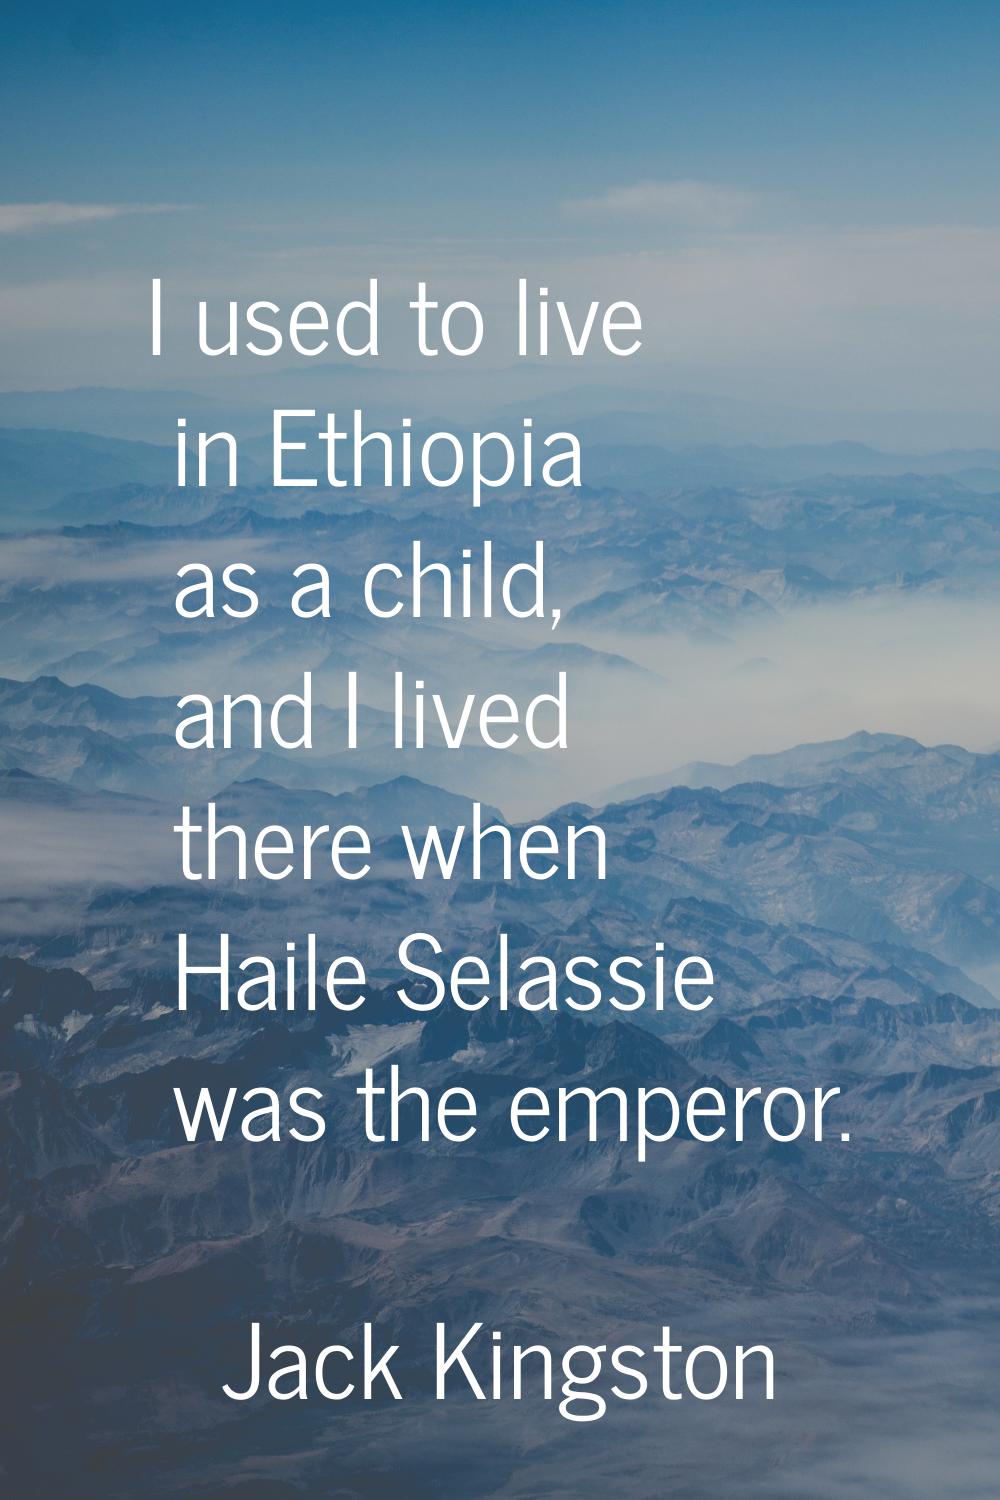 I used to live in Ethiopia as a child, and I lived there when Haile Selassie was the emperor.